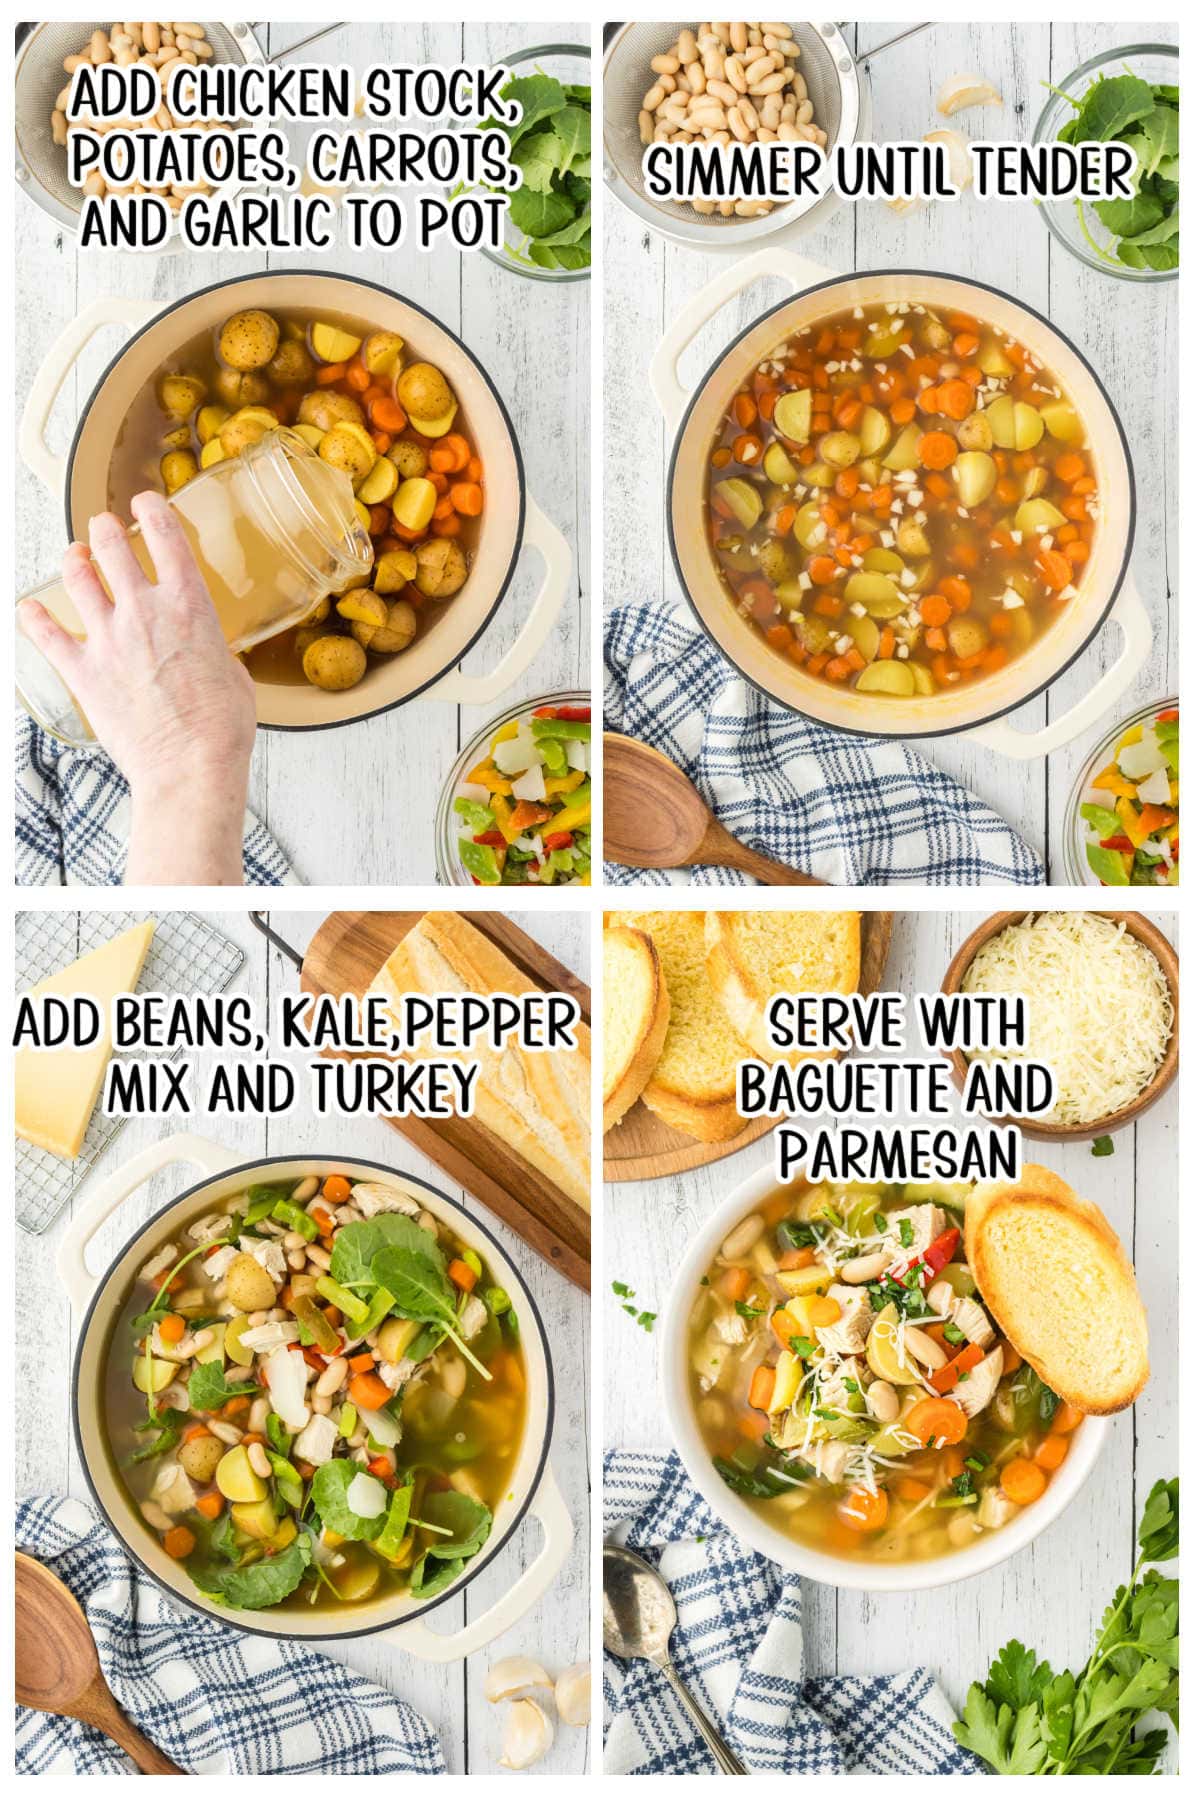 Four overhead images of a stock pot and soup ingredients in a grid, each illustrating a main step to make Tuscan turkey soup. Each photo has text overlay describing what is listed in the instructions below the image.